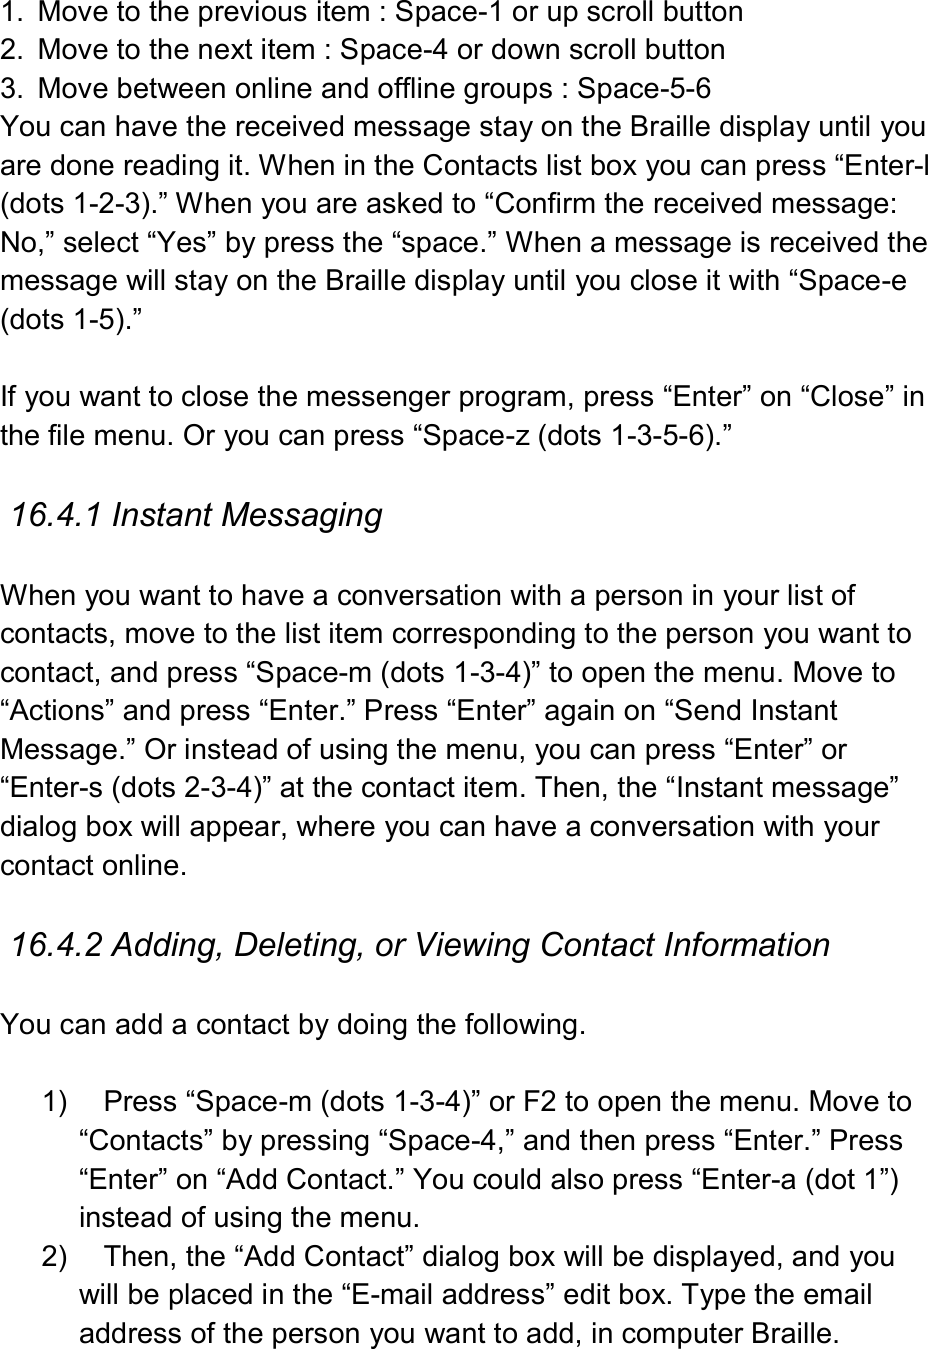   1.  Move to the previous item : Space-1 or up scroll button 2.  Move to the next item : Space-4 or down scroll button 3.  Move between online and offline groups : Space-5-6 You can have the received message stay on the Braille display until you are done reading it. When in the Contacts list box you can press “Enter-l (dots 1-2-3).” When you are asked to “Confirm the received message: No,” select “Yes” by press the “space.” When a message is received the message will stay on the Braille display until you close it with “Space-e (dots 1-5).”  If you want to close the messenger program, press “Enter” on “Close” in the file menu. Or you can press “Space-z (dots 1-3-5-6).”  16.4.1 Instant Messaging  When you want to have a conversation with a person in your list of contacts, move to the list item corresponding to the person you want to contact, and press “Space-m (dots 1-3-4)” to open the menu. Move to “Actions” and press “Enter.” Press “Enter” again on “Send Instant Message.” Or instead of using the menu, you can press “Enter” or “Enter-s (dots 2-3-4)” at the contact item. Then, the “Instant message” dialog box will appear, where you can have a conversation with your contact online.    16.4.2 Adding, Deleting, or Viewing Contact Information  You can add a contact by doing the following.  1)  Press “Space-m (dots 1-3-4)” or F2 to open the menu. Move to “Contacts” by pressing “Space-4,” and then press “Enter.” Press “Enter” on “Add Contact.” You could also press “Enter-a (dot 1”) instead of using the menu. 2)  Then, the “Add Contact” dialog box will be displayed, and you will be placed in the “E-mail address” edit box. Type the email address of the person you want to add, in computer Braille. 